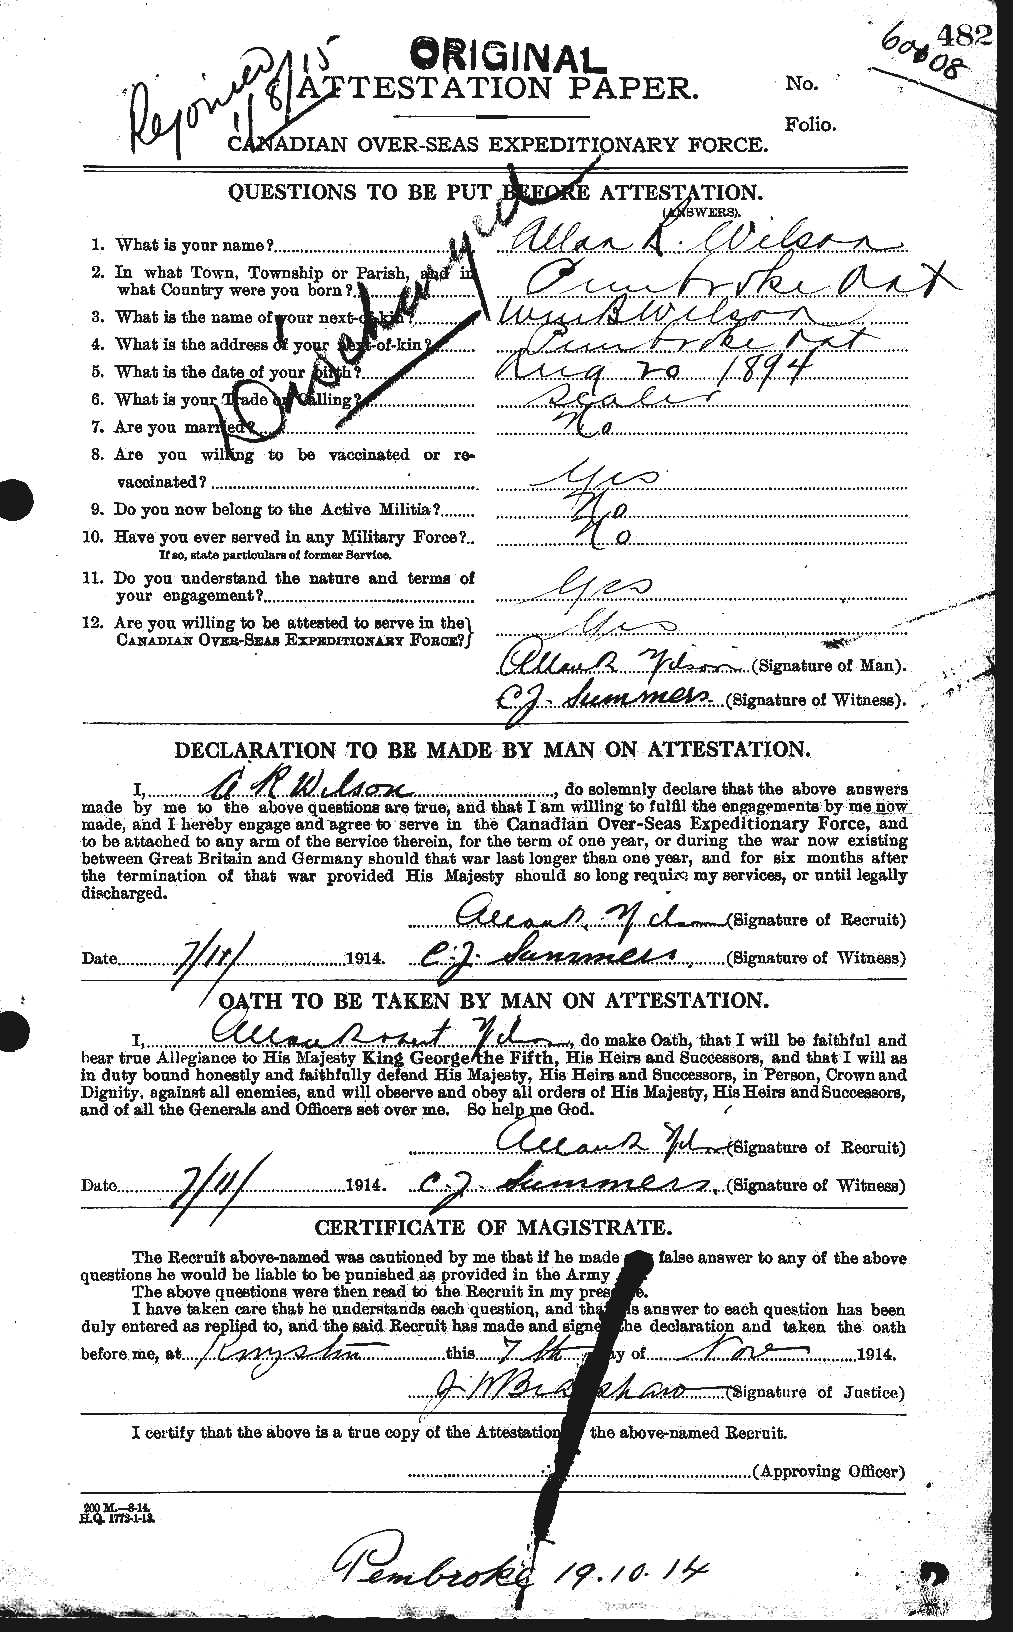 Personnel Records of the First World War - CEF 677264a